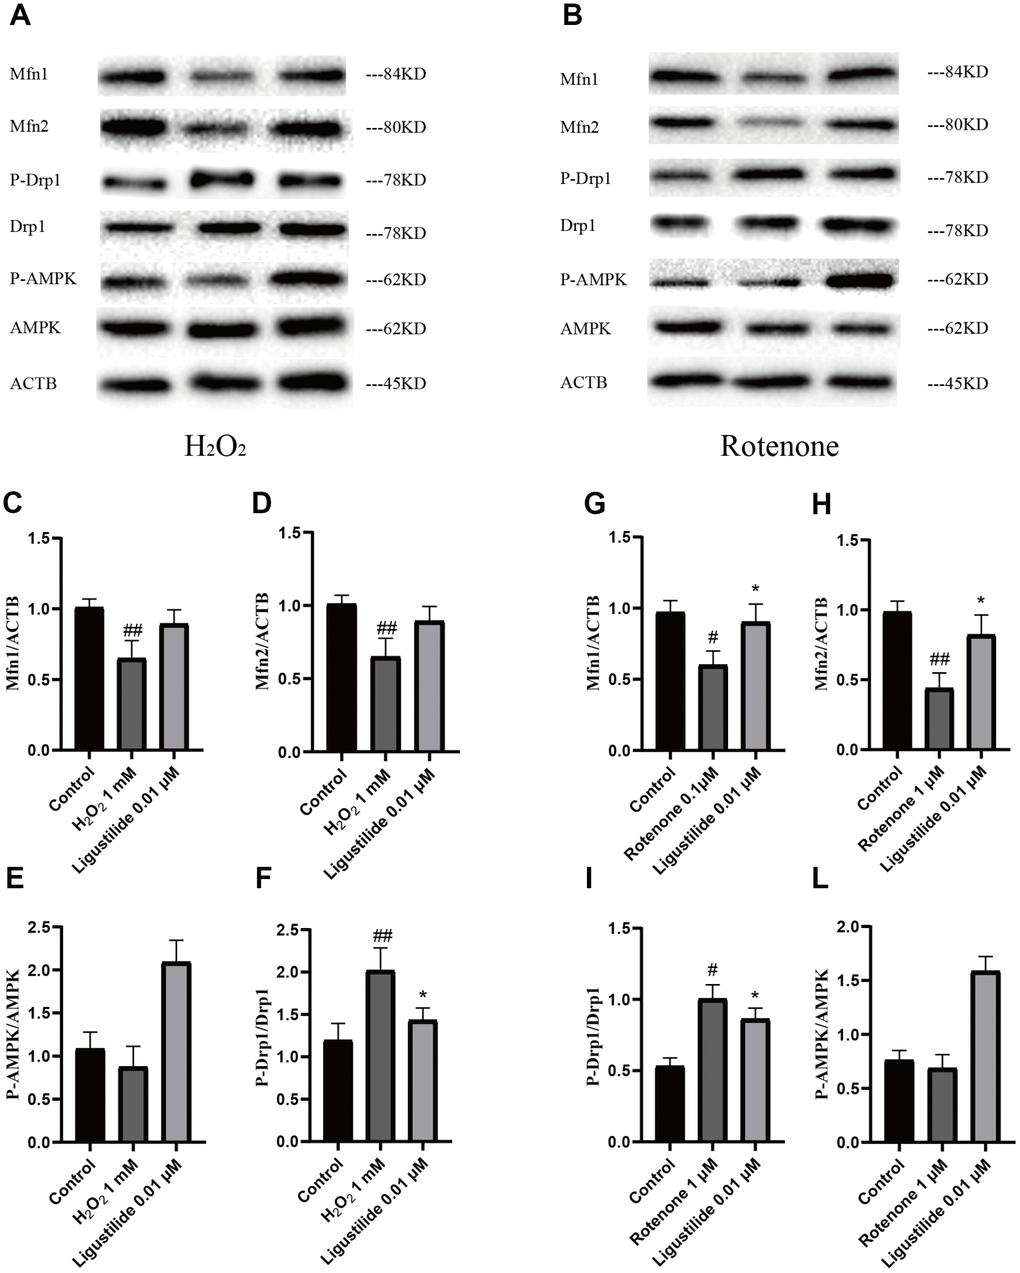 Ligustilide attenuates H2O2-induced and Rotenone-induced mitochondrial impairment in HT22 cells. (A, B) Western blotting was used to detect mitochondrial morphology-related proteins (C, G) Mfn1. (D, H) Mfn2. (E, L) P-Drp1. (F, I) P-AMPK.. Ligustilide 10 (10 mg/kg/d); Ligustilide 20 (20 mg/kg/d). Data represent mean ± SD (n = 20 per group). #p p p p p p 